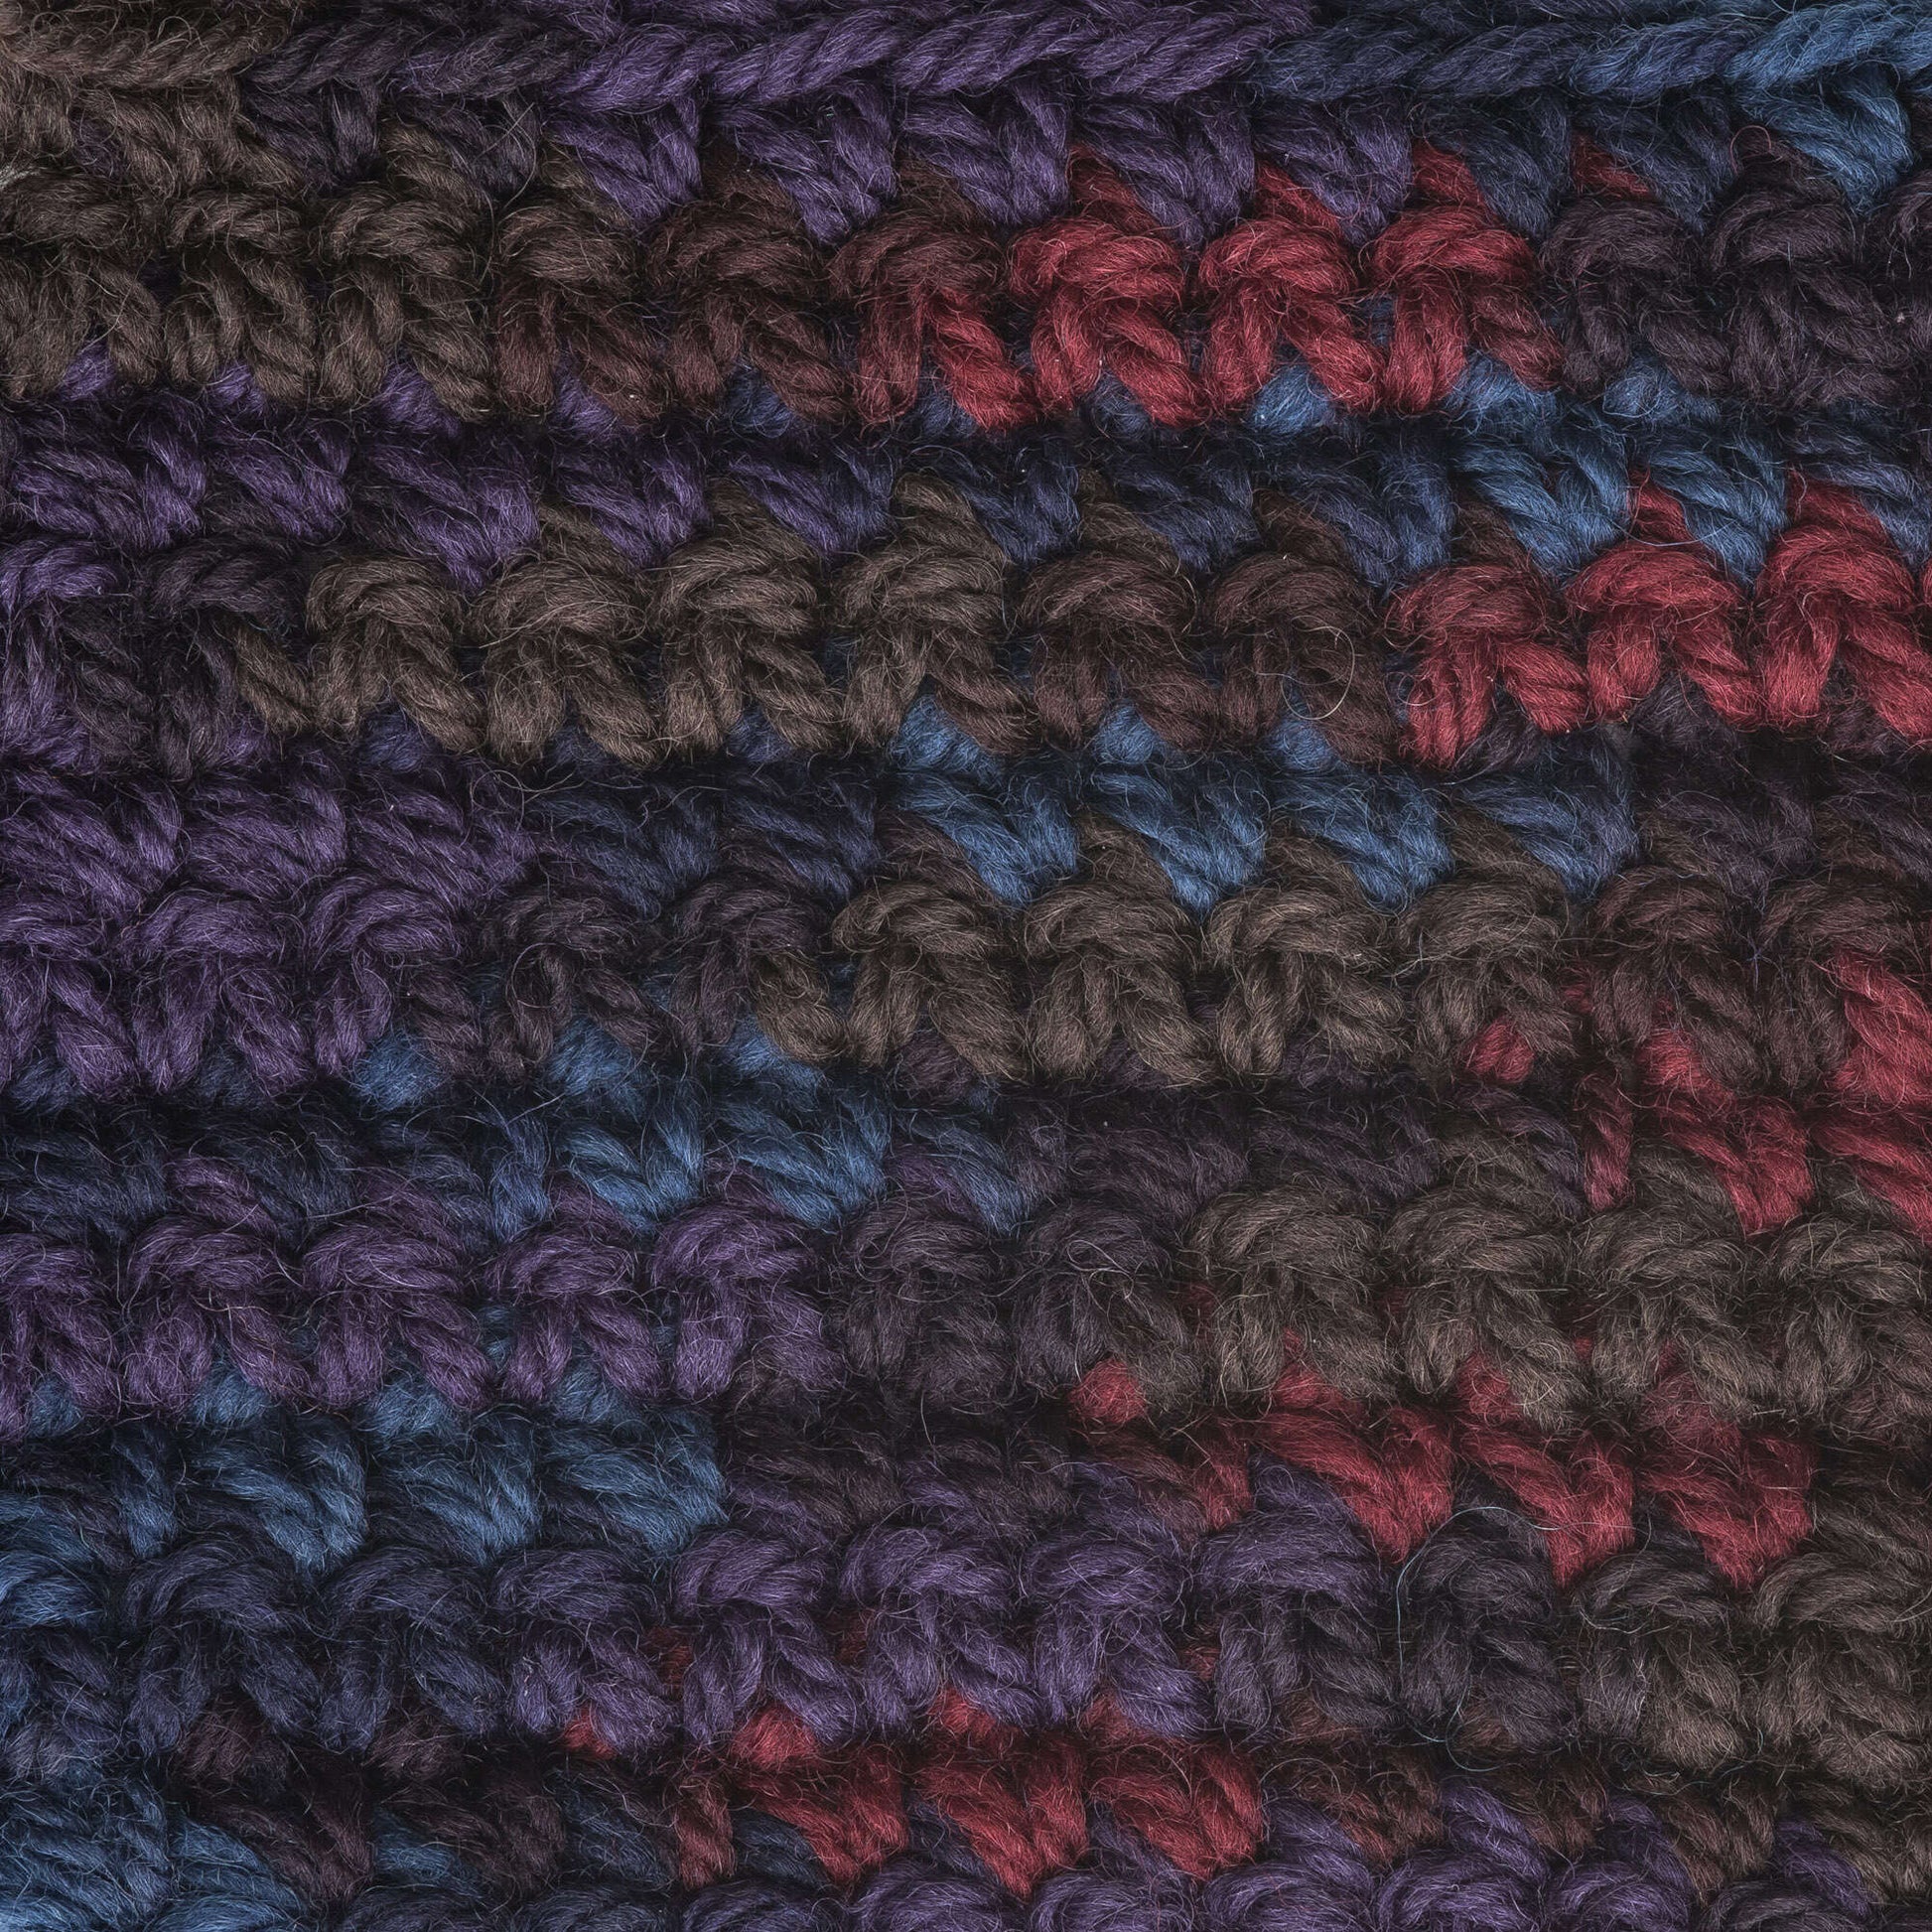 Patons Classic Wool Worsted Yarn - Discontinued Shades